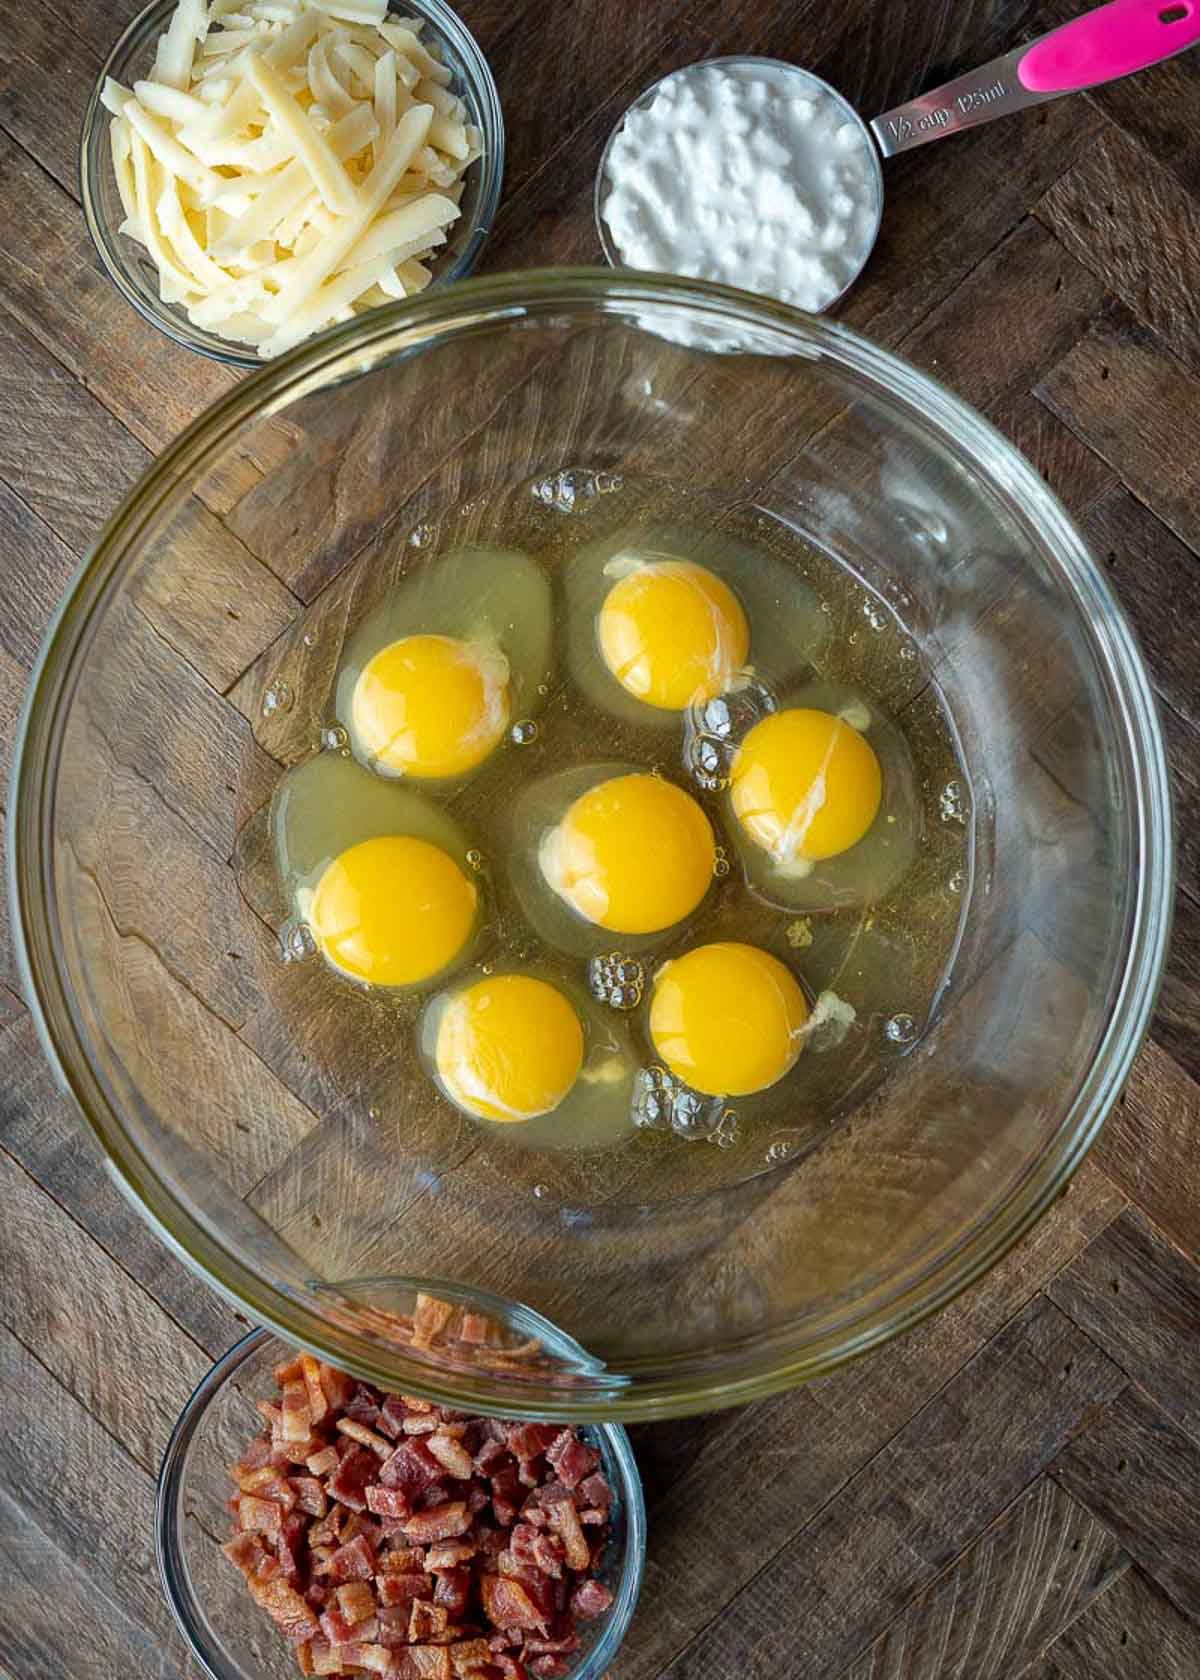 Overhead view of the ingredients needed for egg bites: a bowl of eggs, a bowl of bacon pieces, a bowl of shredded. gruyere cheese, and a measuring cup of cottage cheese